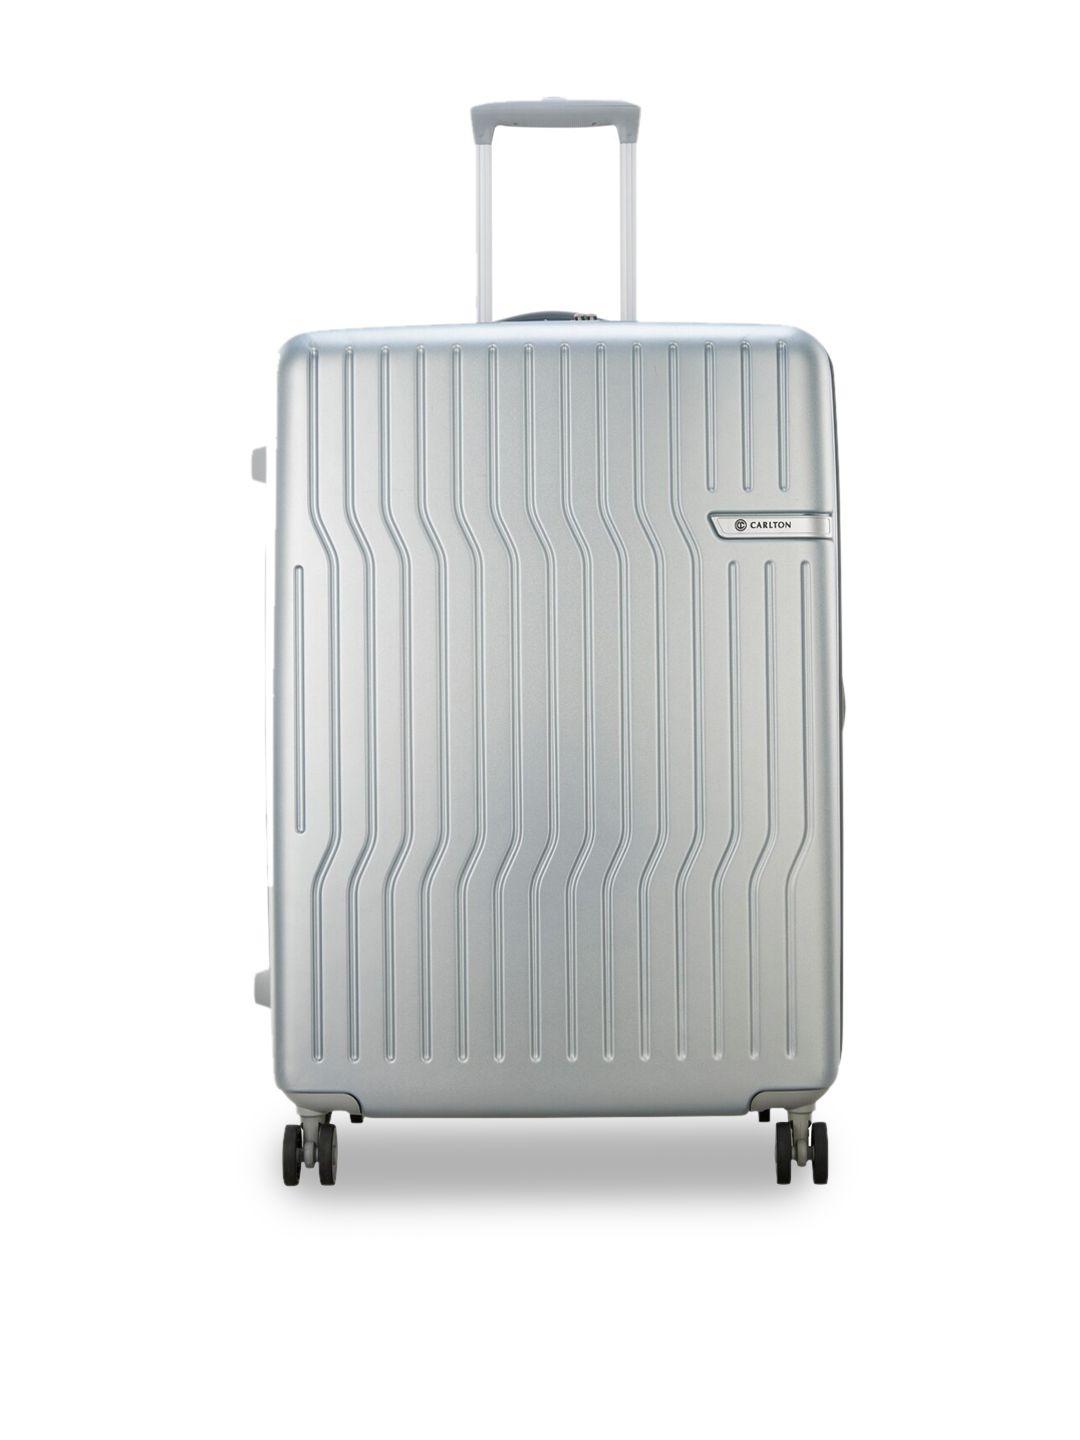 carlton textured hard-sided large trolley suitcase